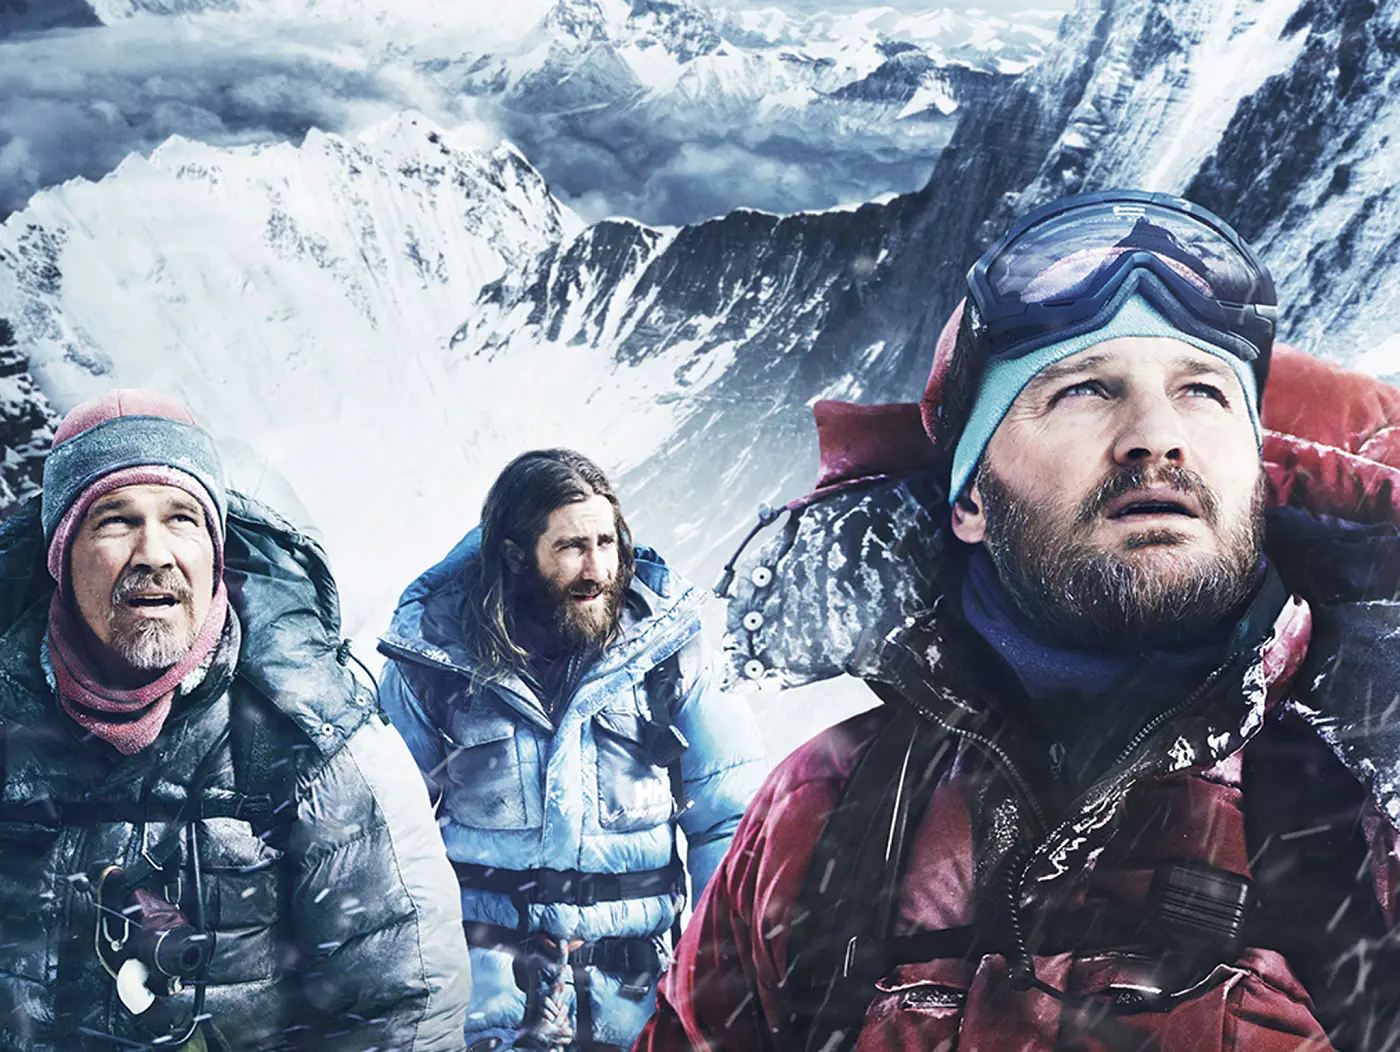 Everest Filming Locations in Nepal and Italy: Experience the World’s Most Dangerous Climb